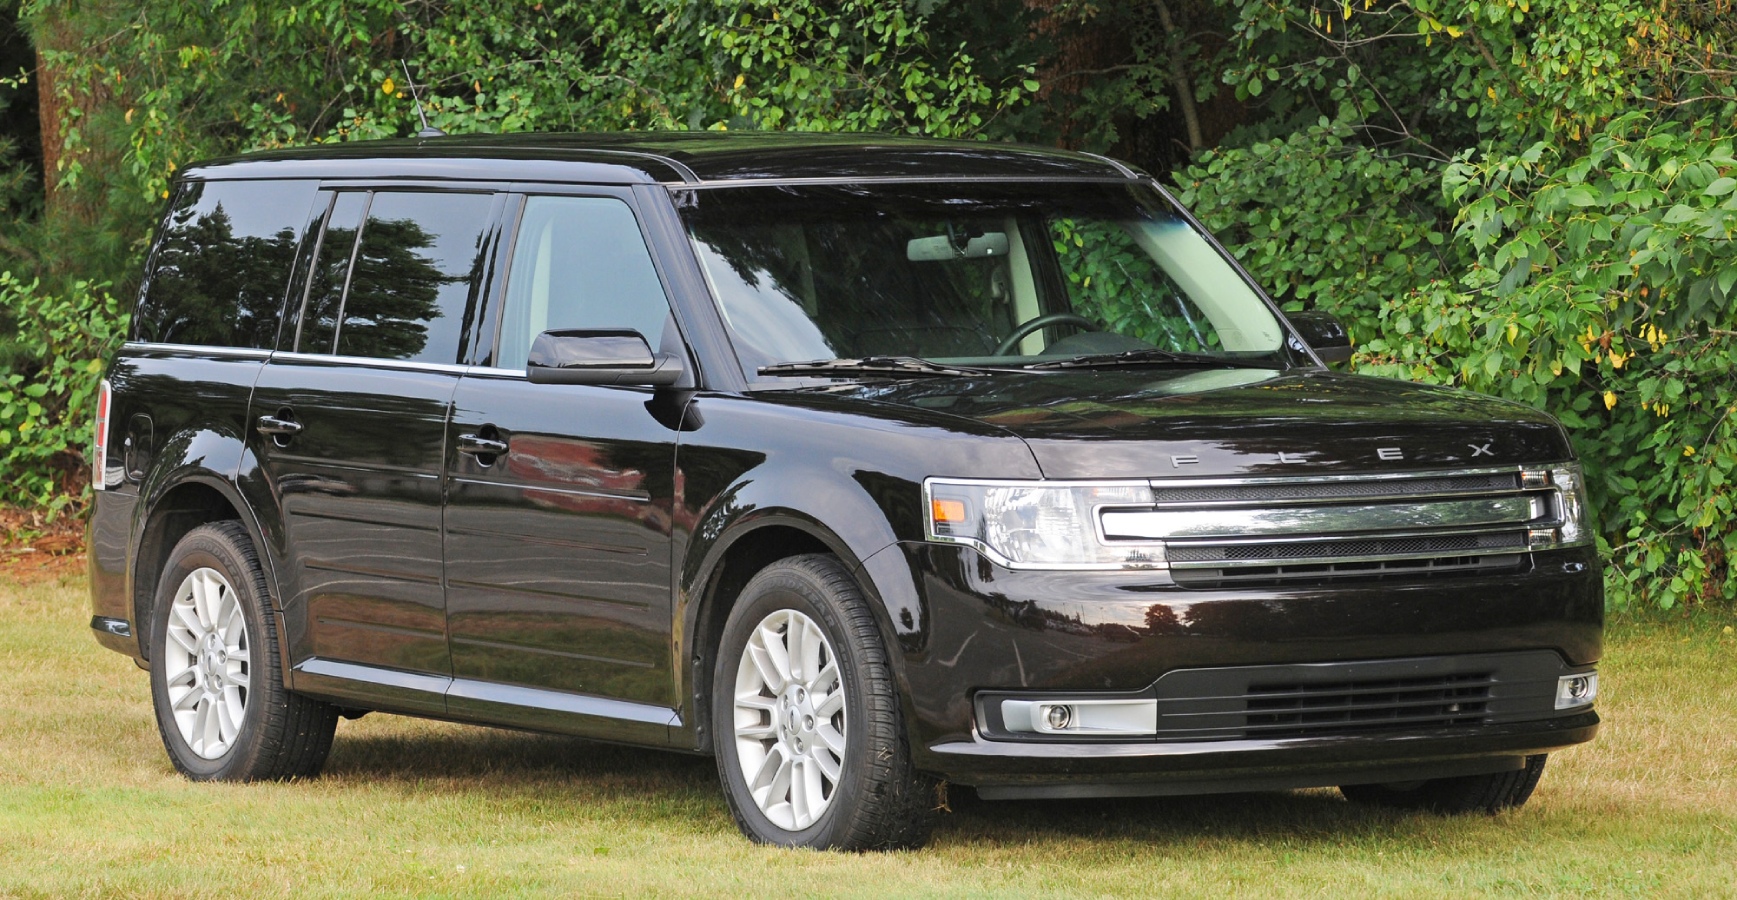 The best SUVs with the most comfortable ride includes the Ford Flex